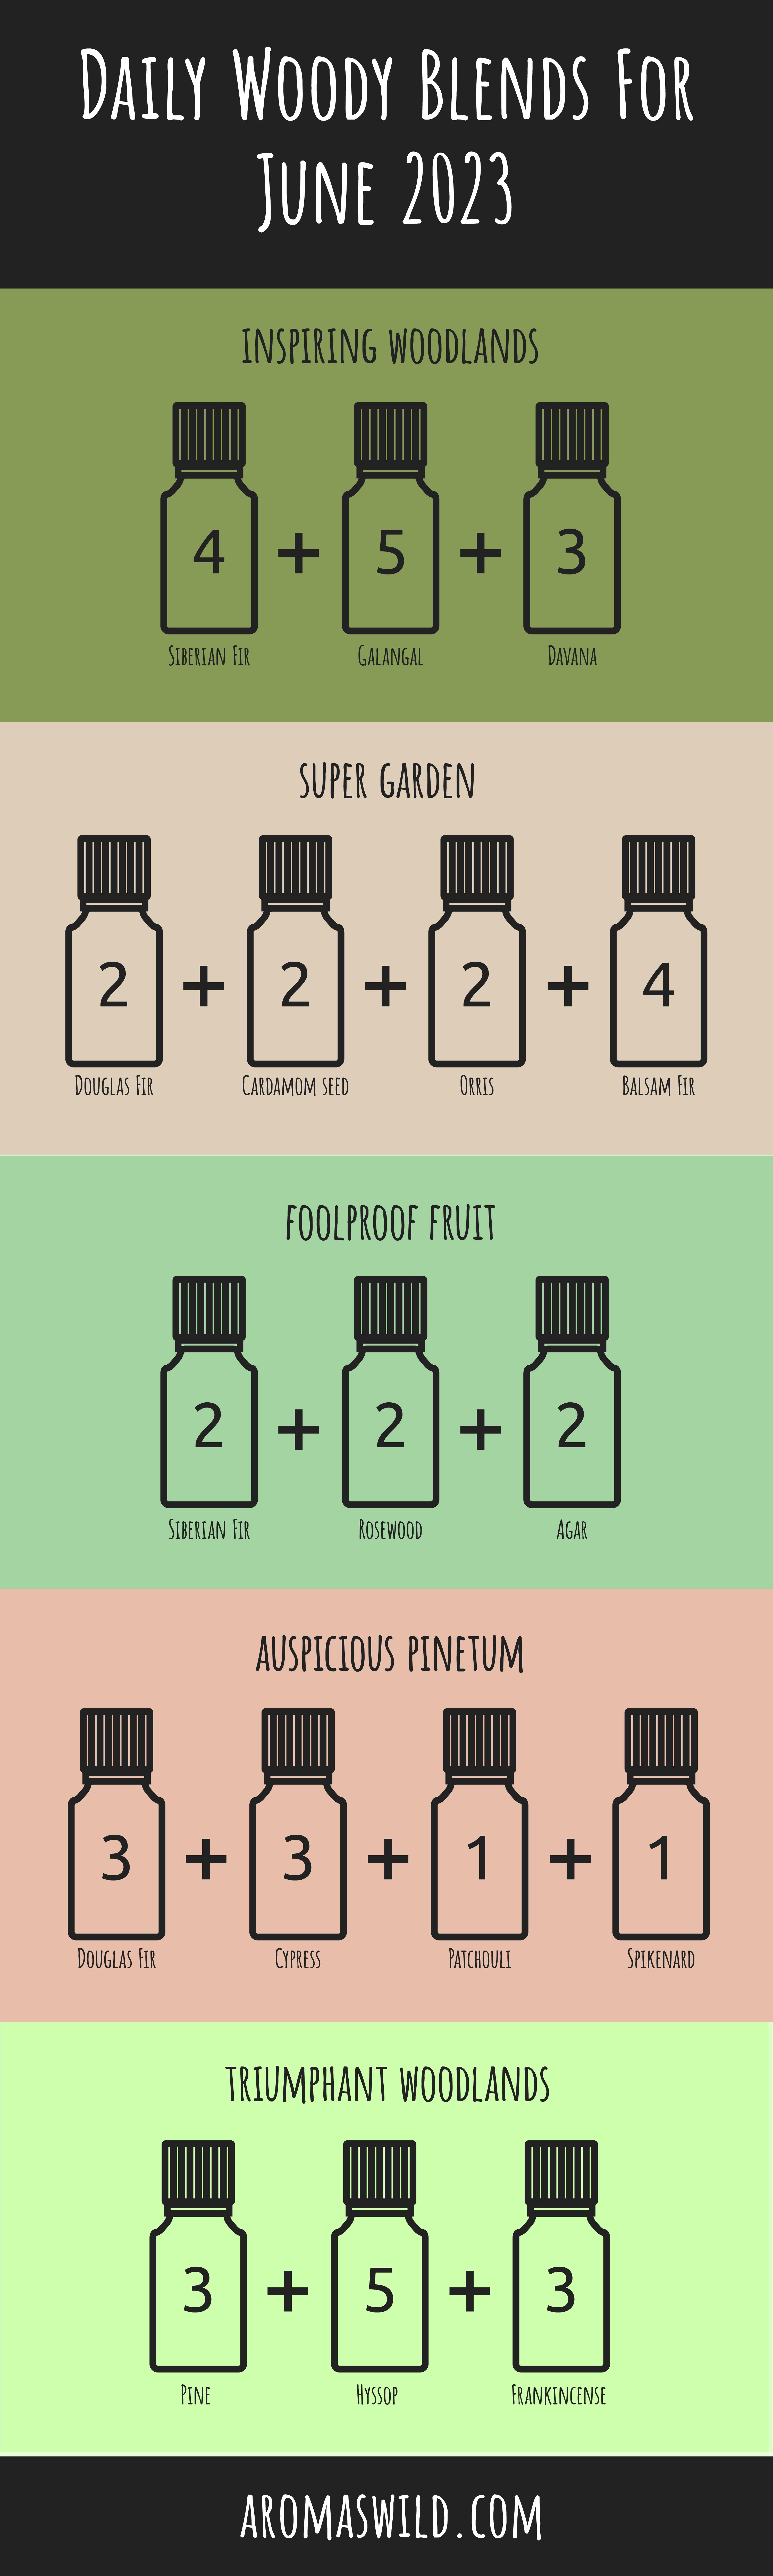 DIY Woodsy Scents For Aromatherapy – Daily Woody Blends For 10 June 2023